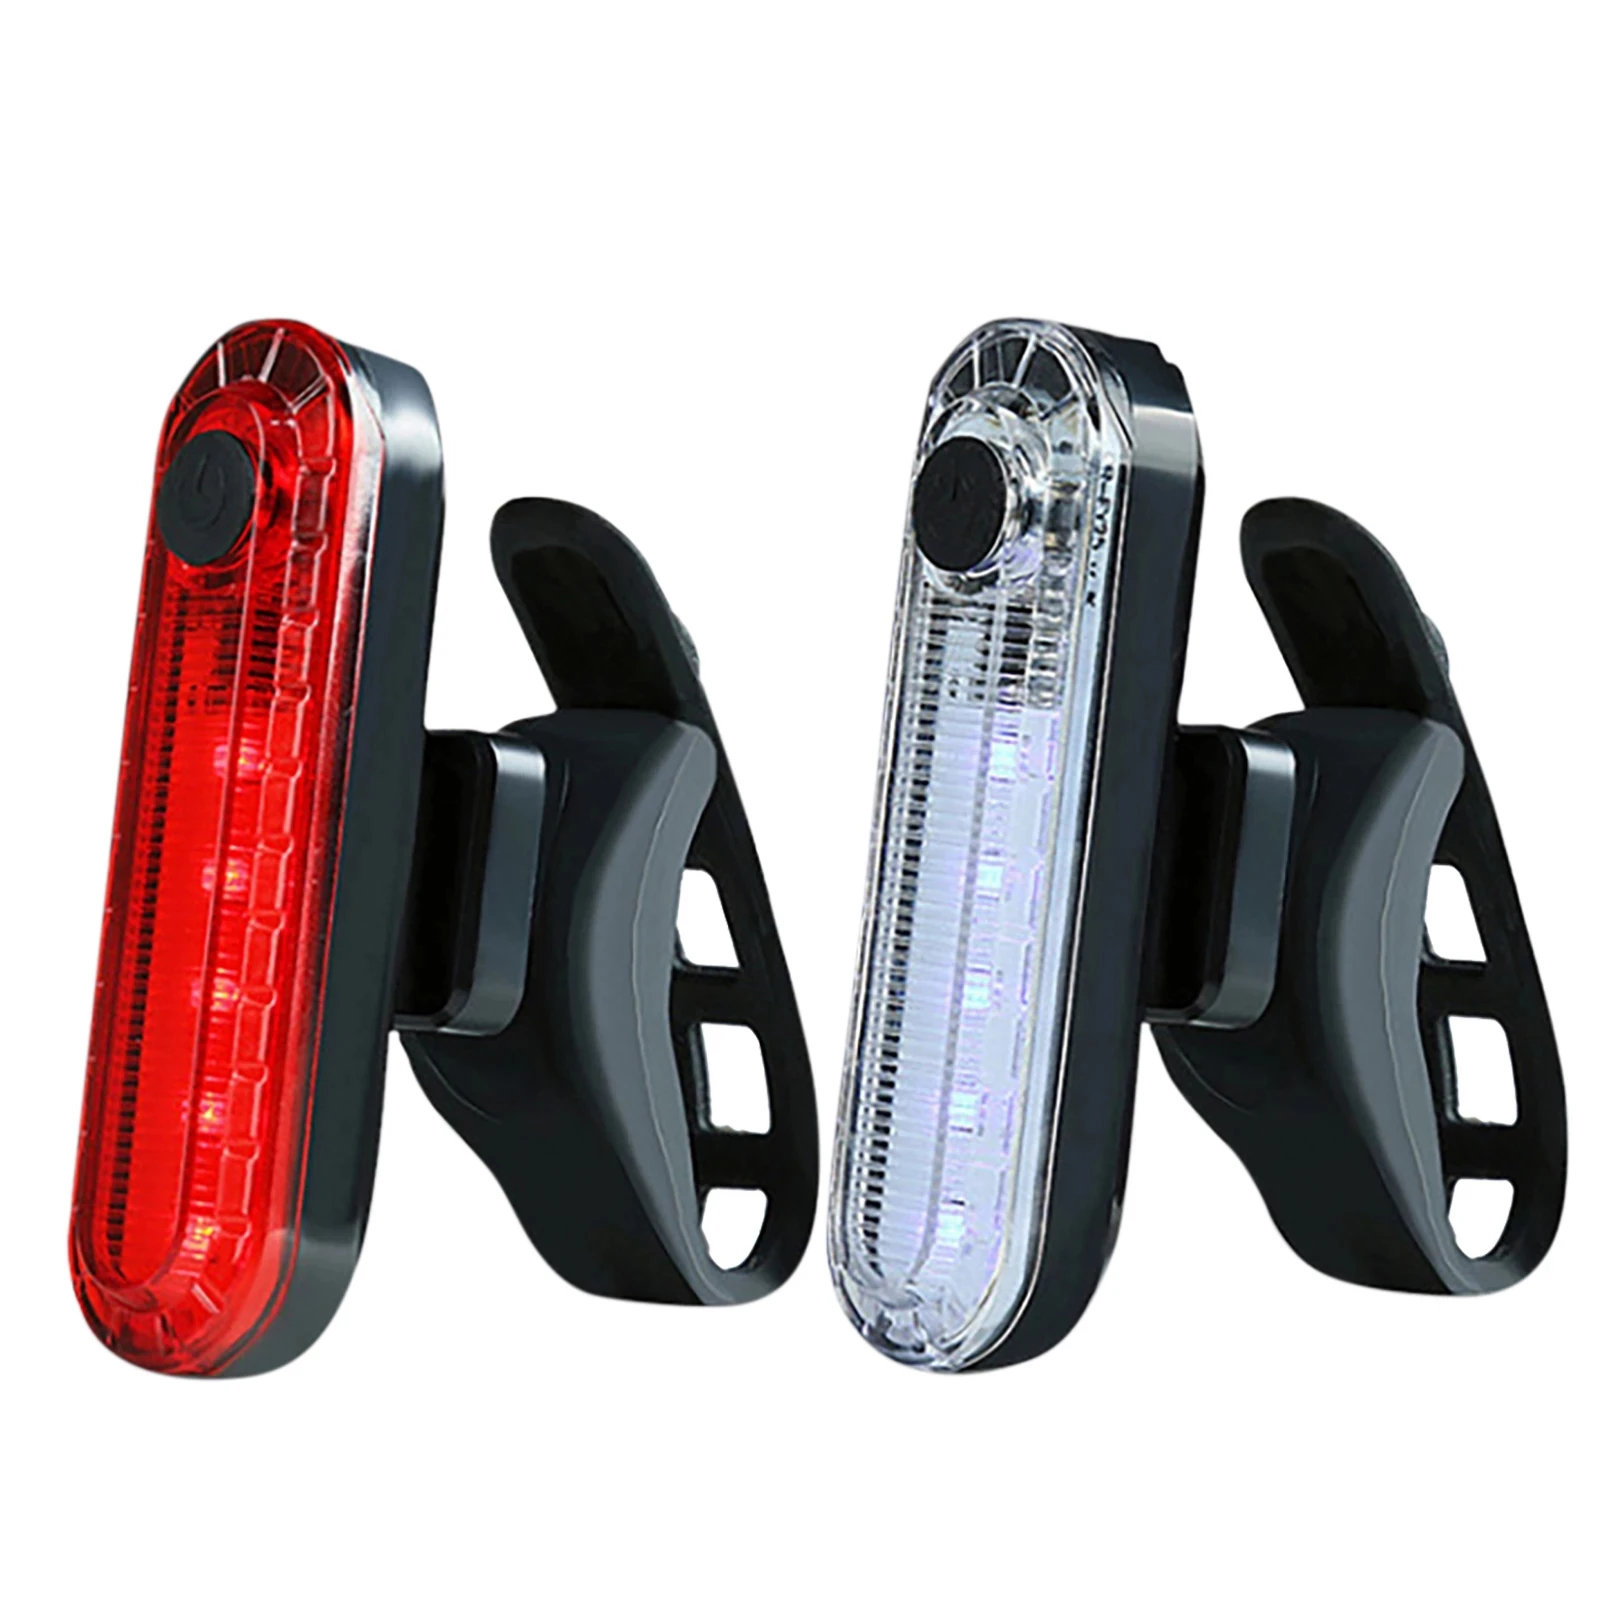 

120Lumens Bicycle Rear Light USB Rechargeable Cycling 4 Modes LED Tail Light Waterproof MTB Road Bike Taillight Bicycle Lamp, Red white